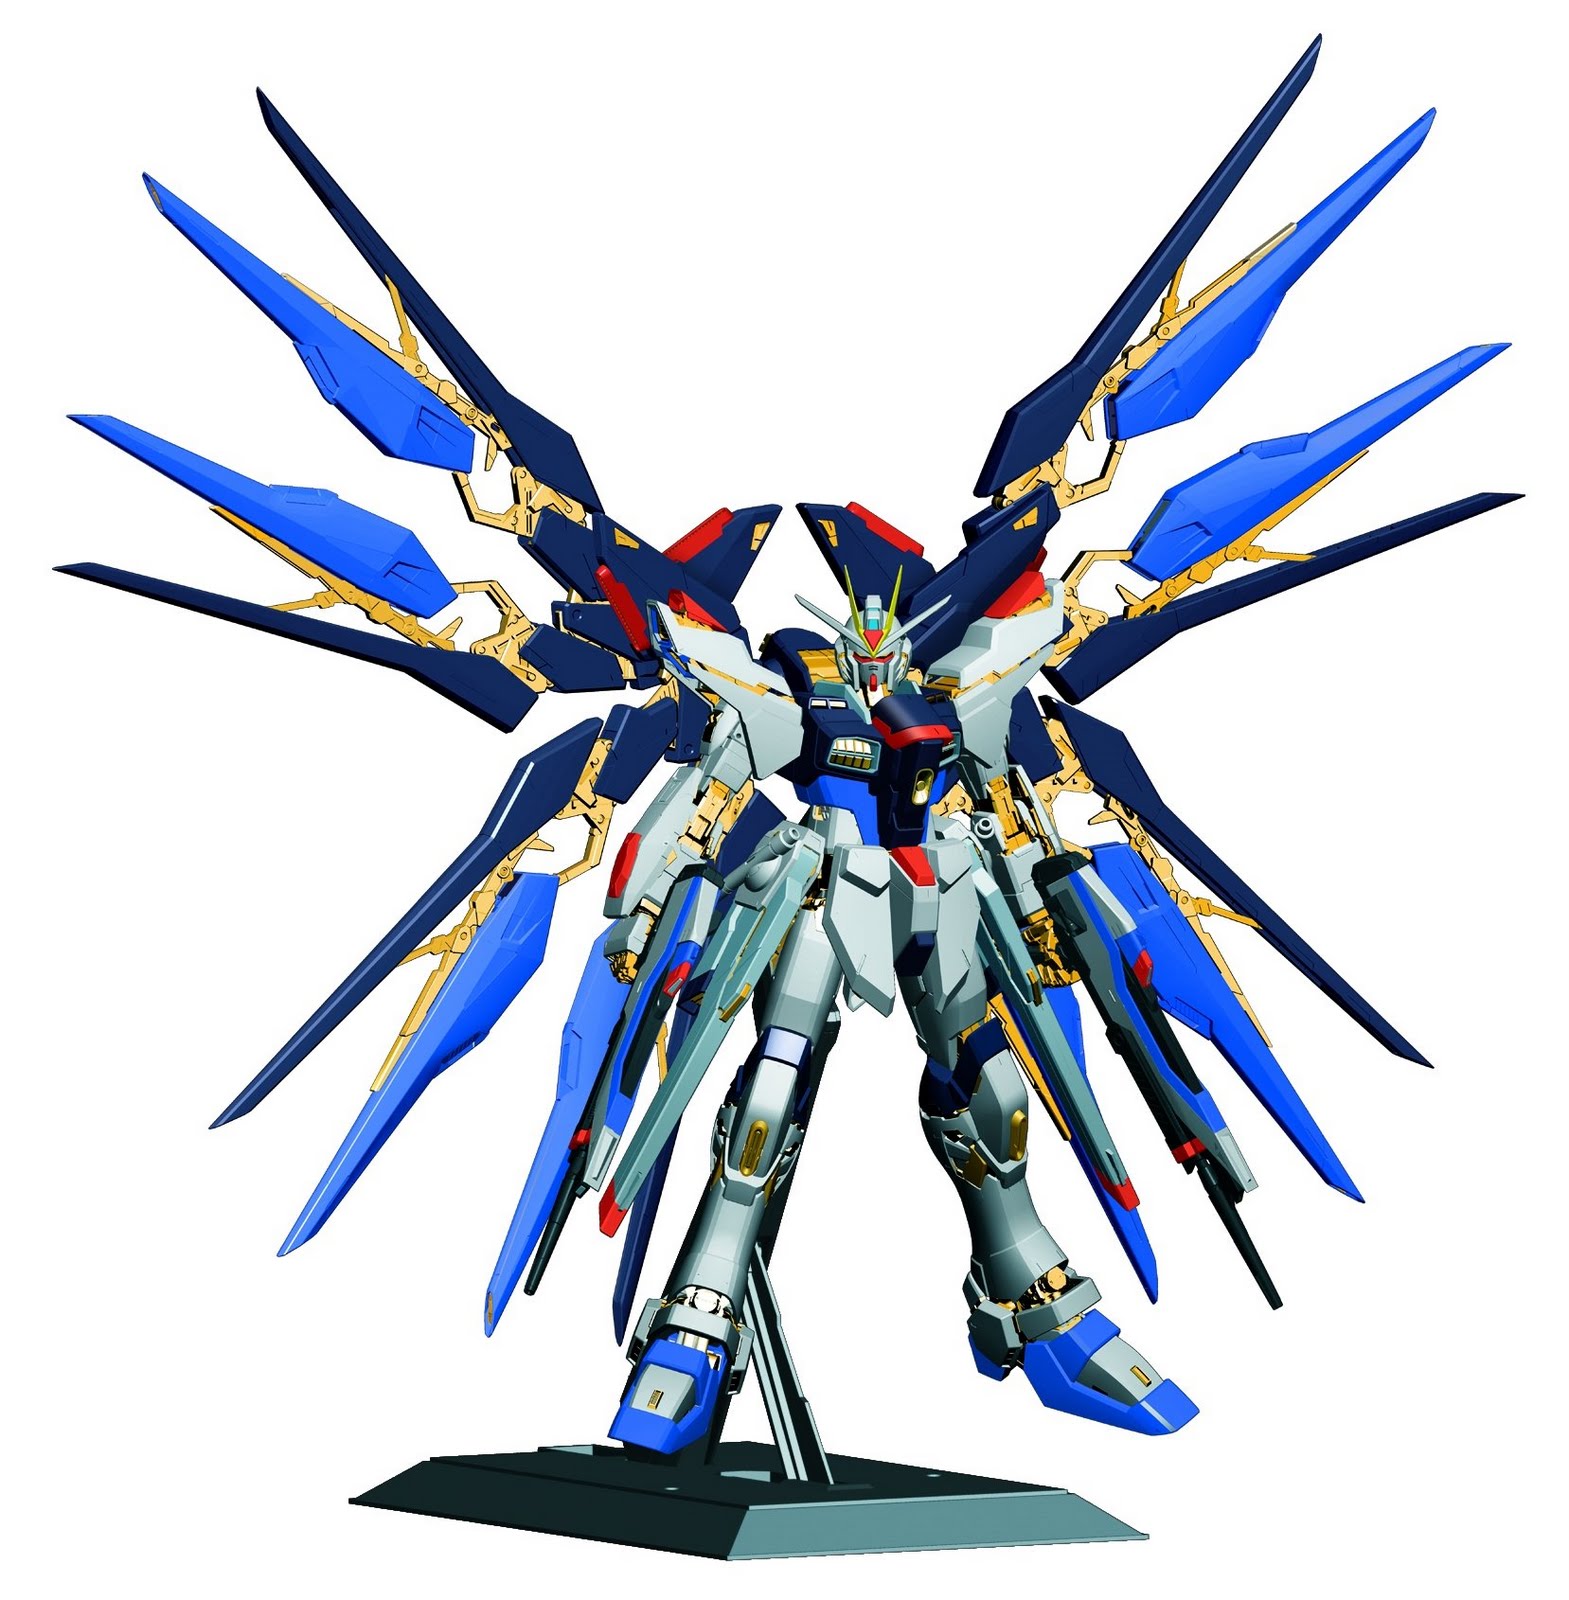 strike freedom gundam wallpaper,action figure,graphic design,wing,electric blue,graphics